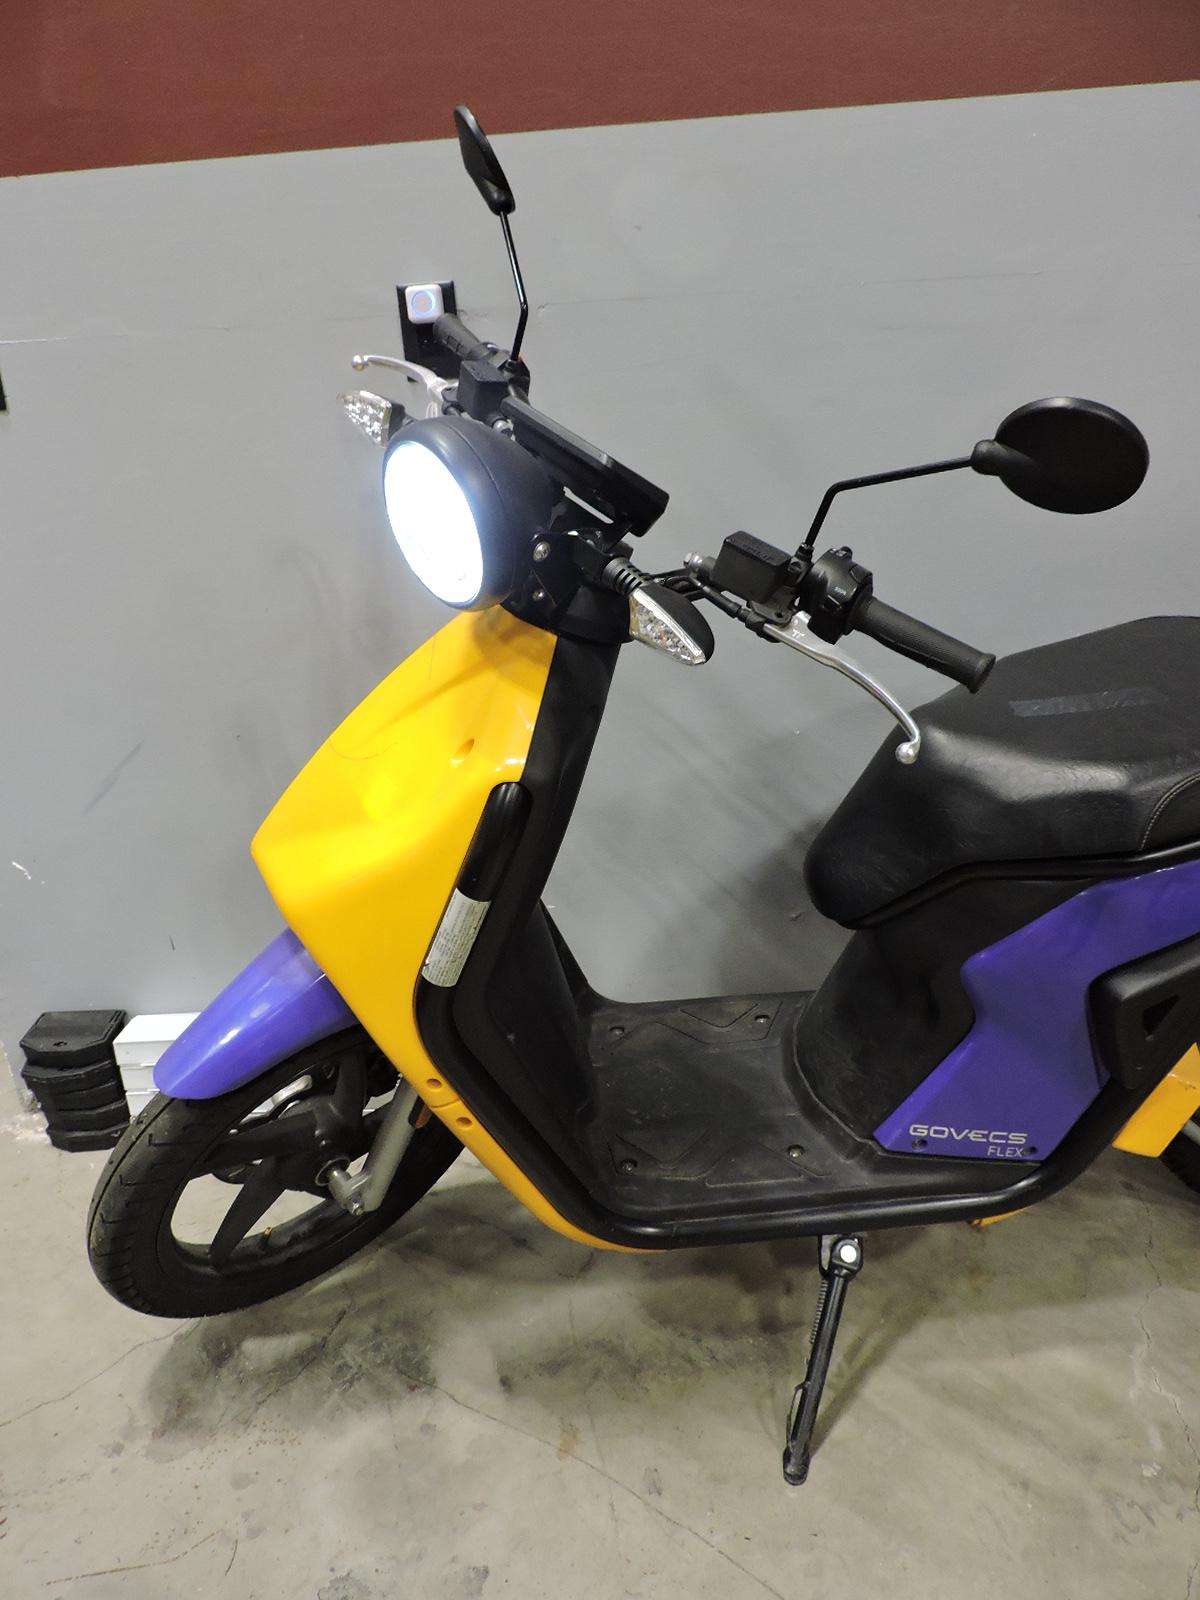 GOVECS FLEX 2.0 - Electric Scooter - Moped / 2541.0 Mi / 2 Keys, Battery & Charger - Runs Well